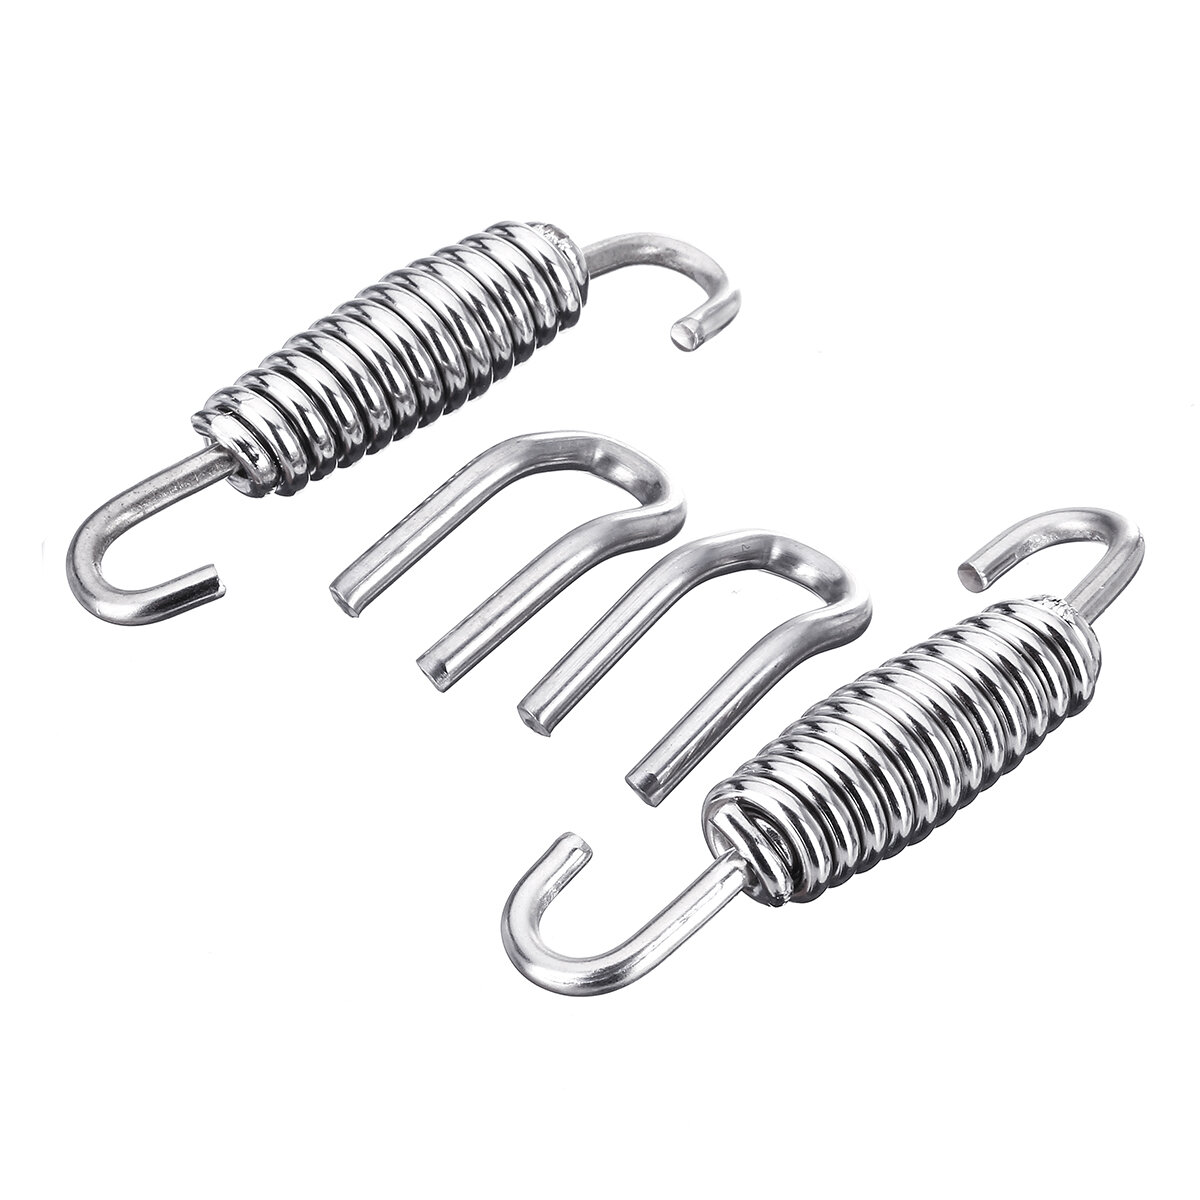 2pcs 50mm Stainless Steel Exhaust Muffler Springs Expansion Chambers Manifold Link Pipe